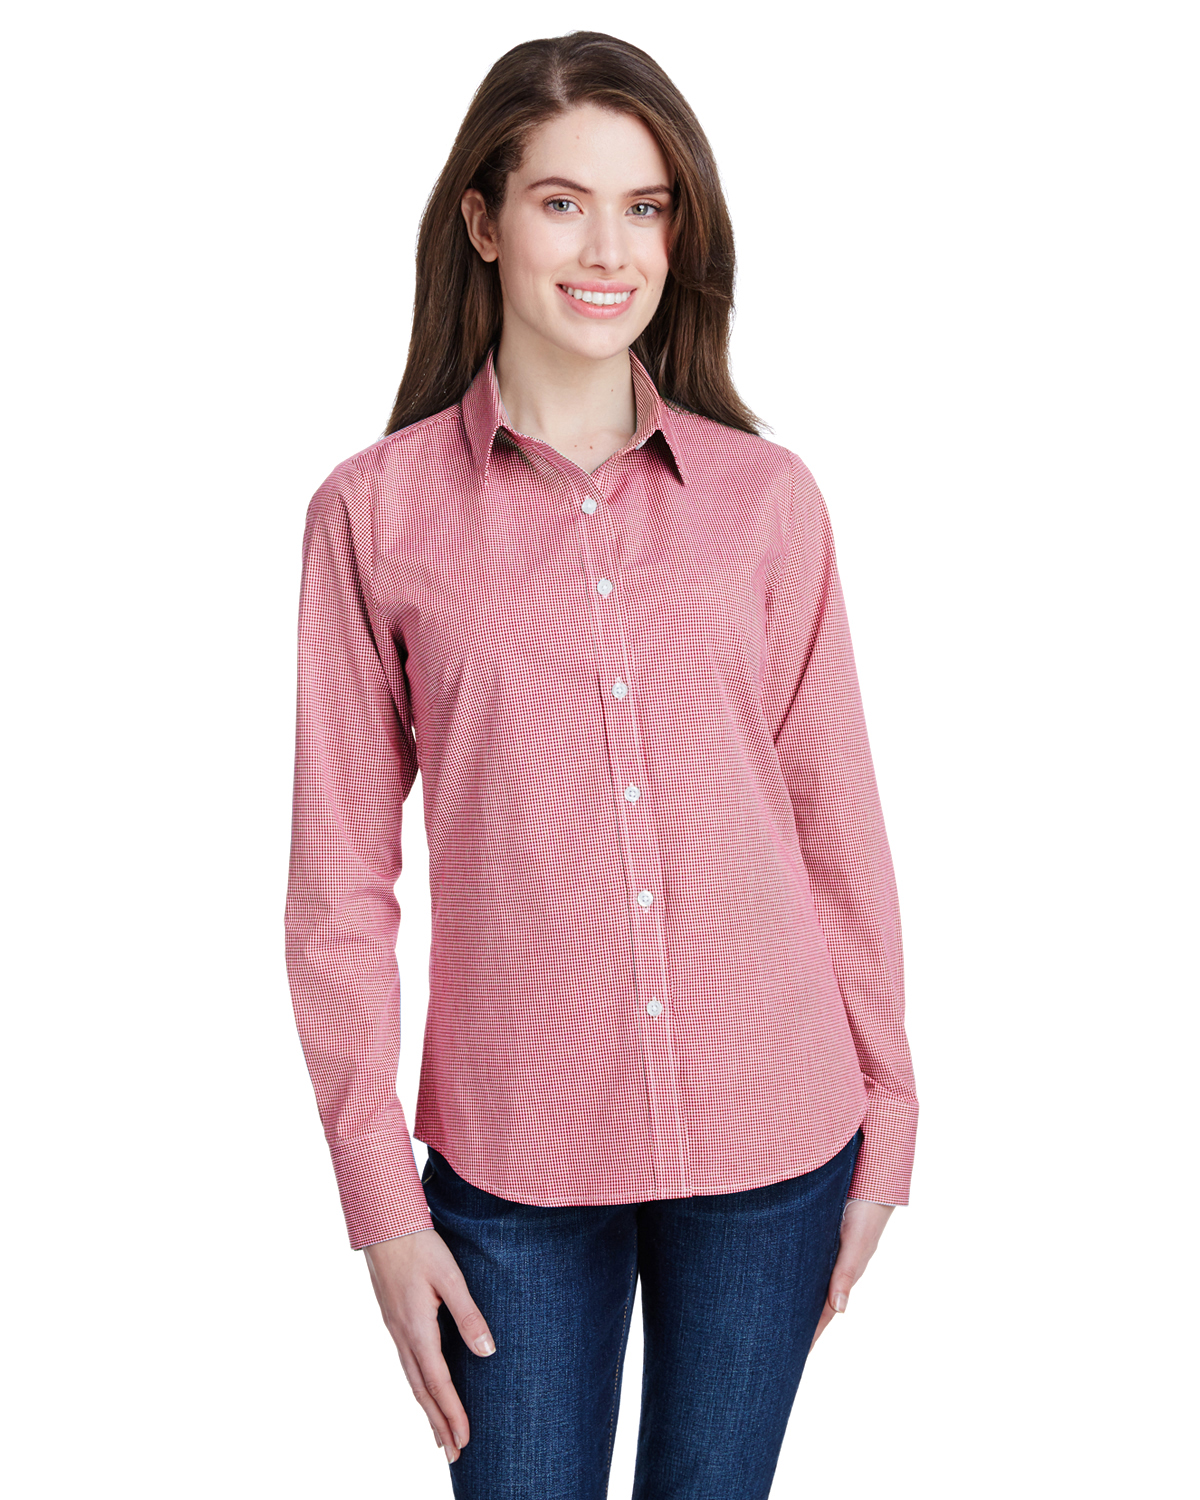 RP320 Artisan Collection by Reprime Ladies\' Microcheck Gingham Long-Sleeve Cotton Shirt